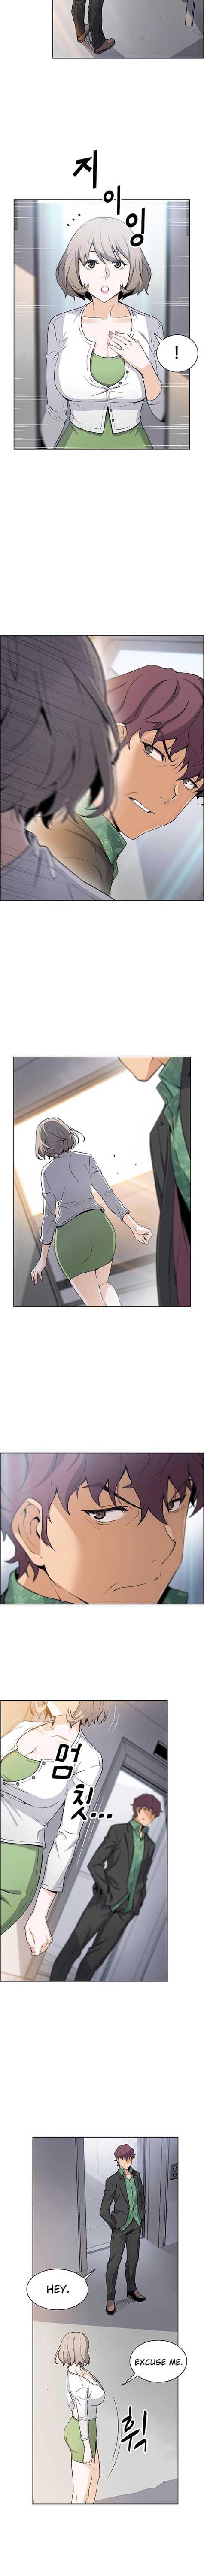 Housekeeper [Neck Pillow, Paper] Ch.49/49 [English] [Manhwa PDF] Completed 280